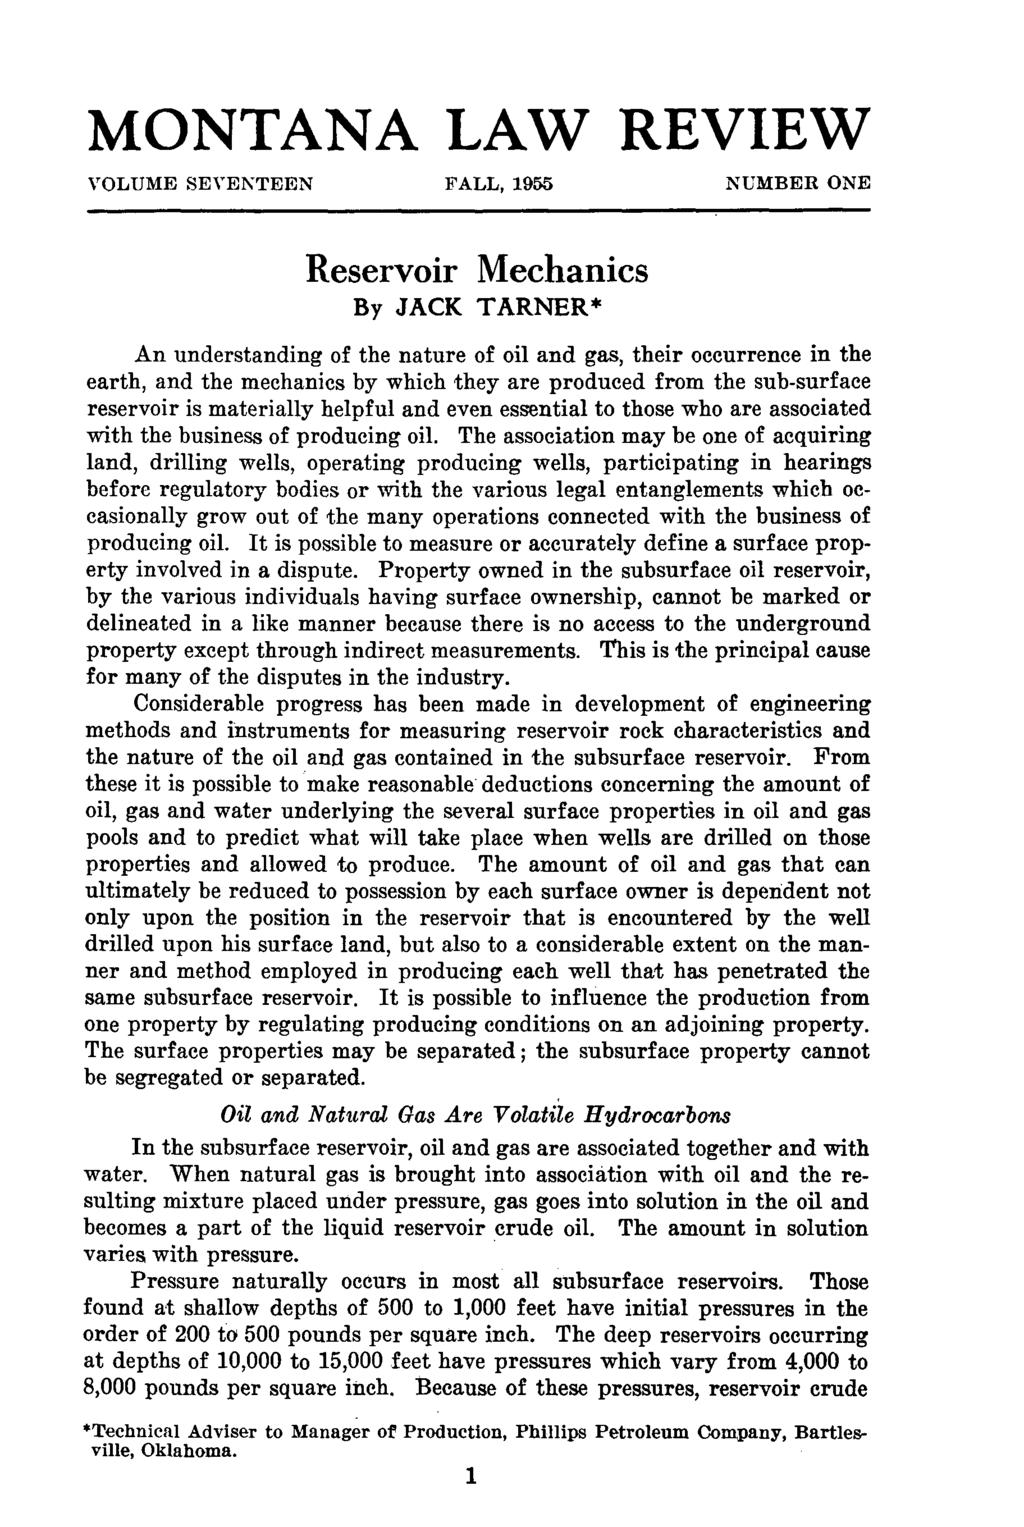 Tarner: Reservoir Mechanics MONTANA LAW REVIEW VOLUME SEVENTEEN FALL, 1955 NUMBER ONE Reservoir Mechanics By JACK TARNER* An understanding of the nature of oil and gas, their occurrence in the earth,